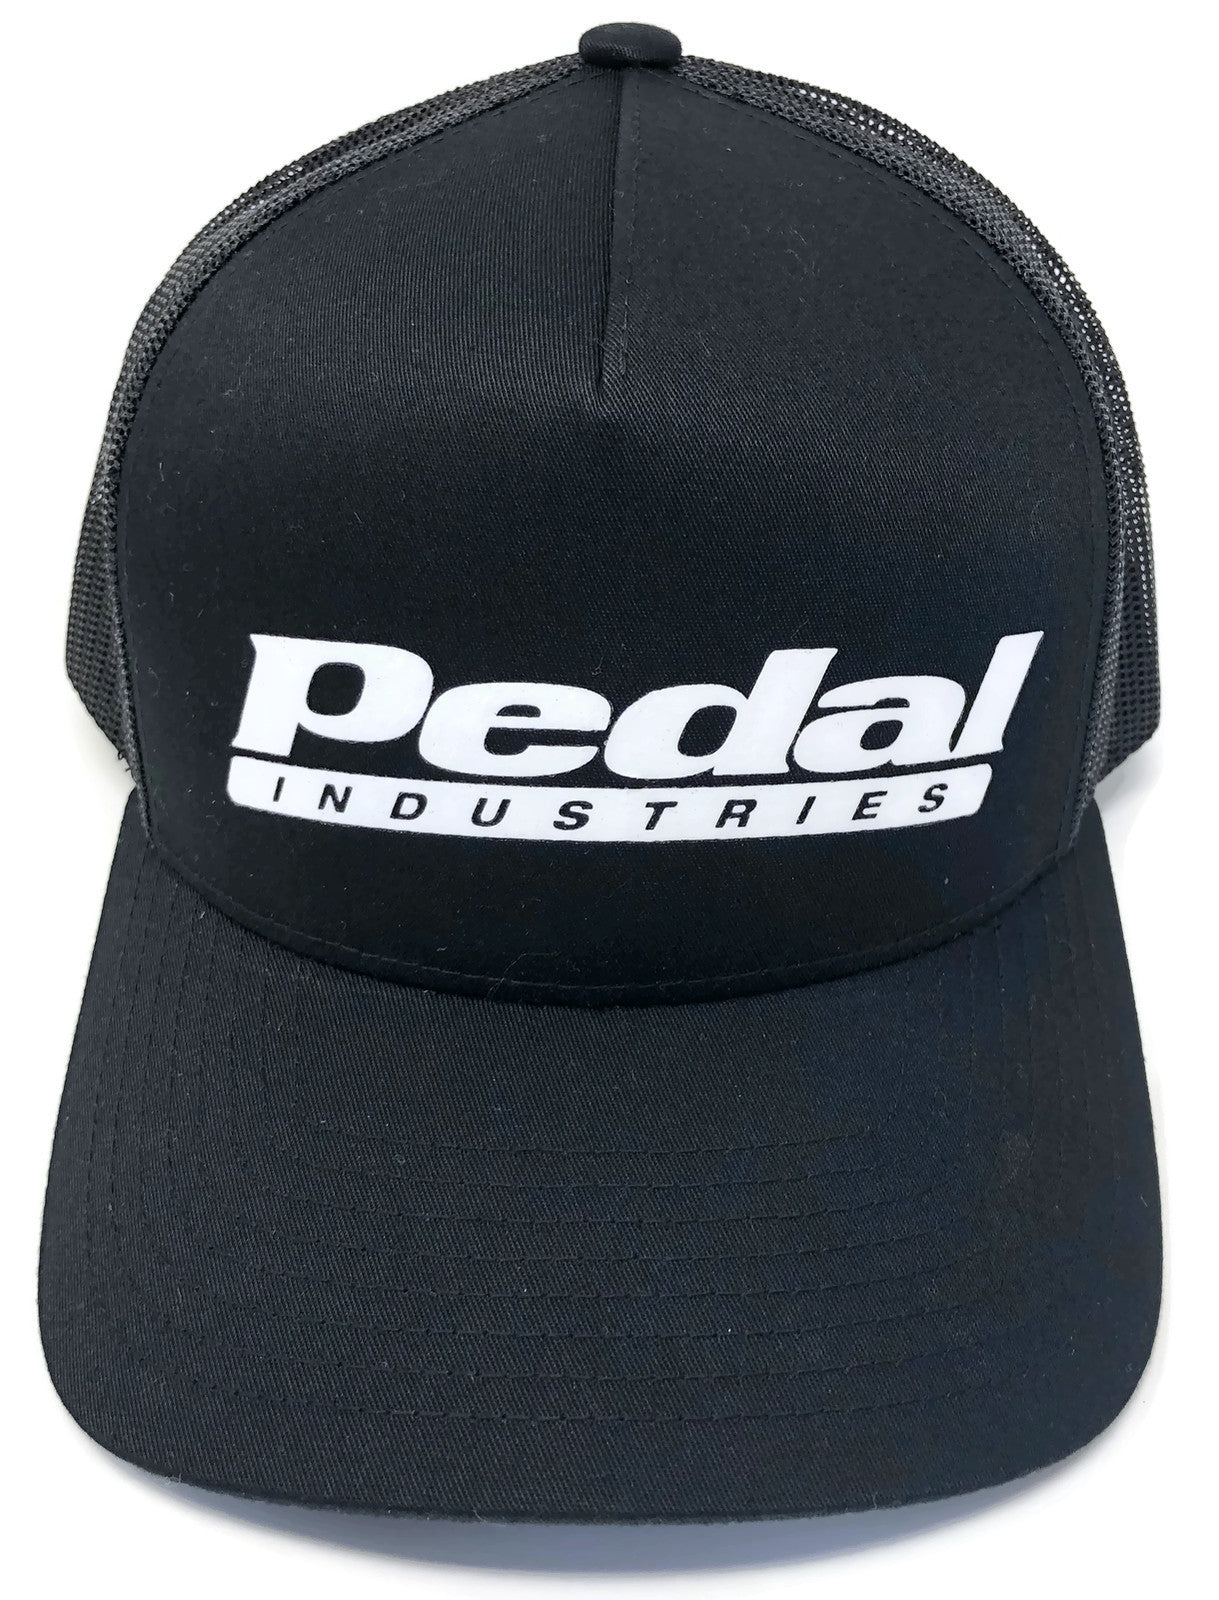 Classic PEDAL industries Trucker - White